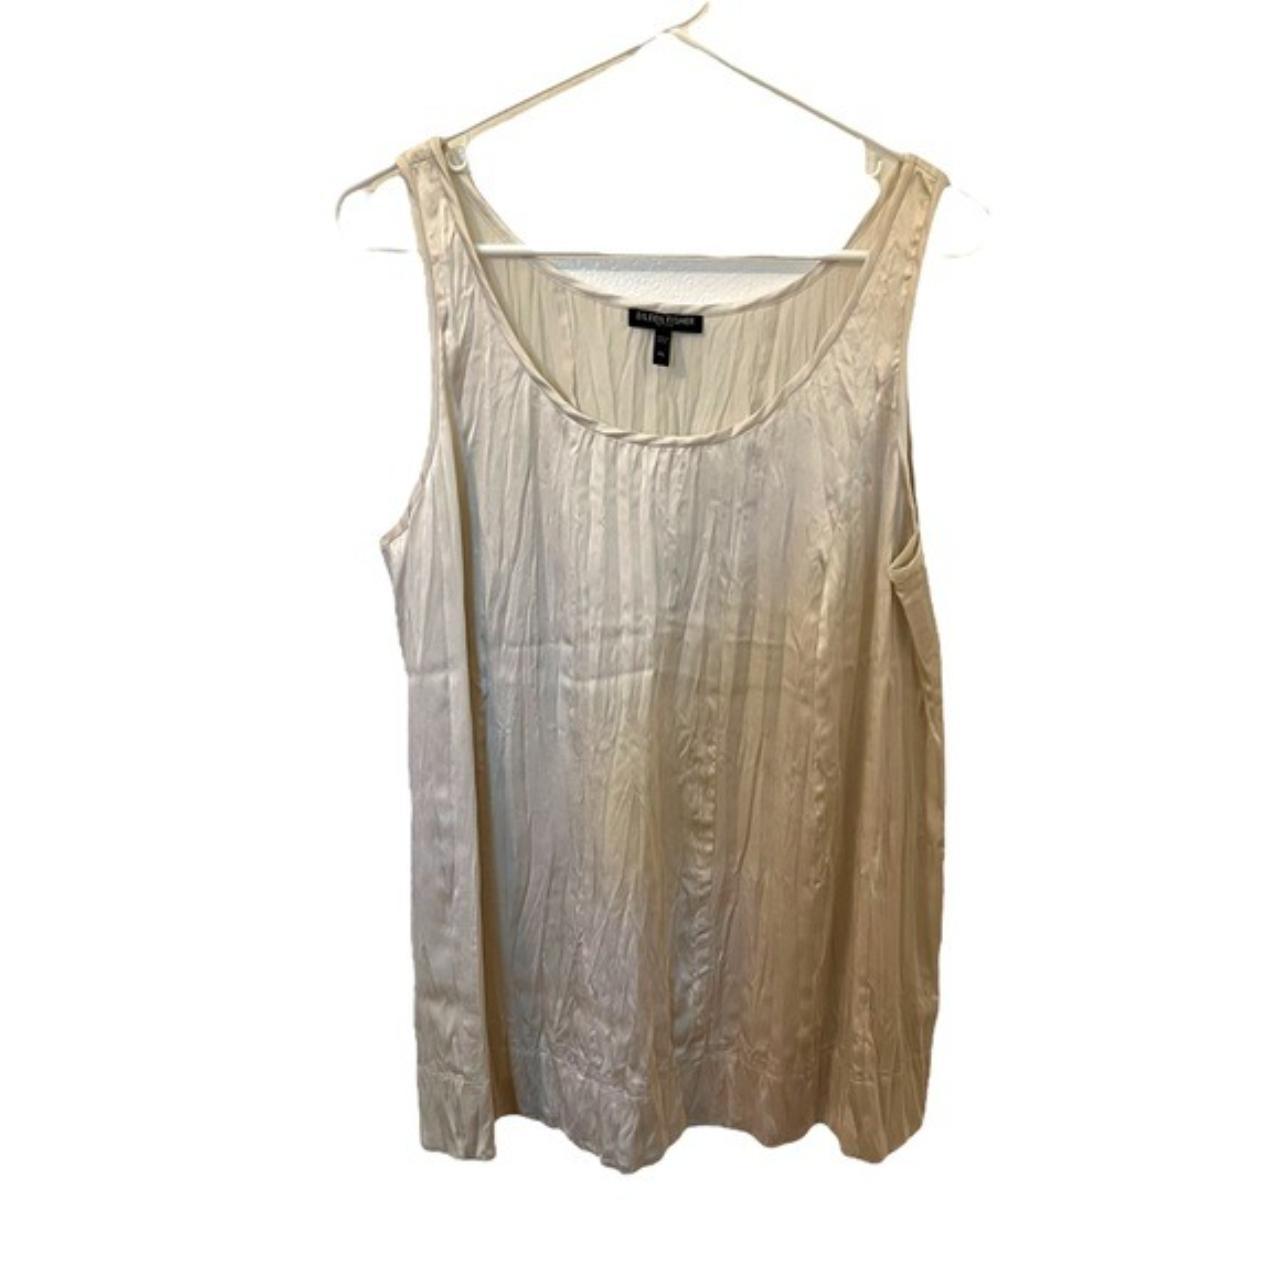 Preowned good used condition Eileen Fisher Shell - Depop